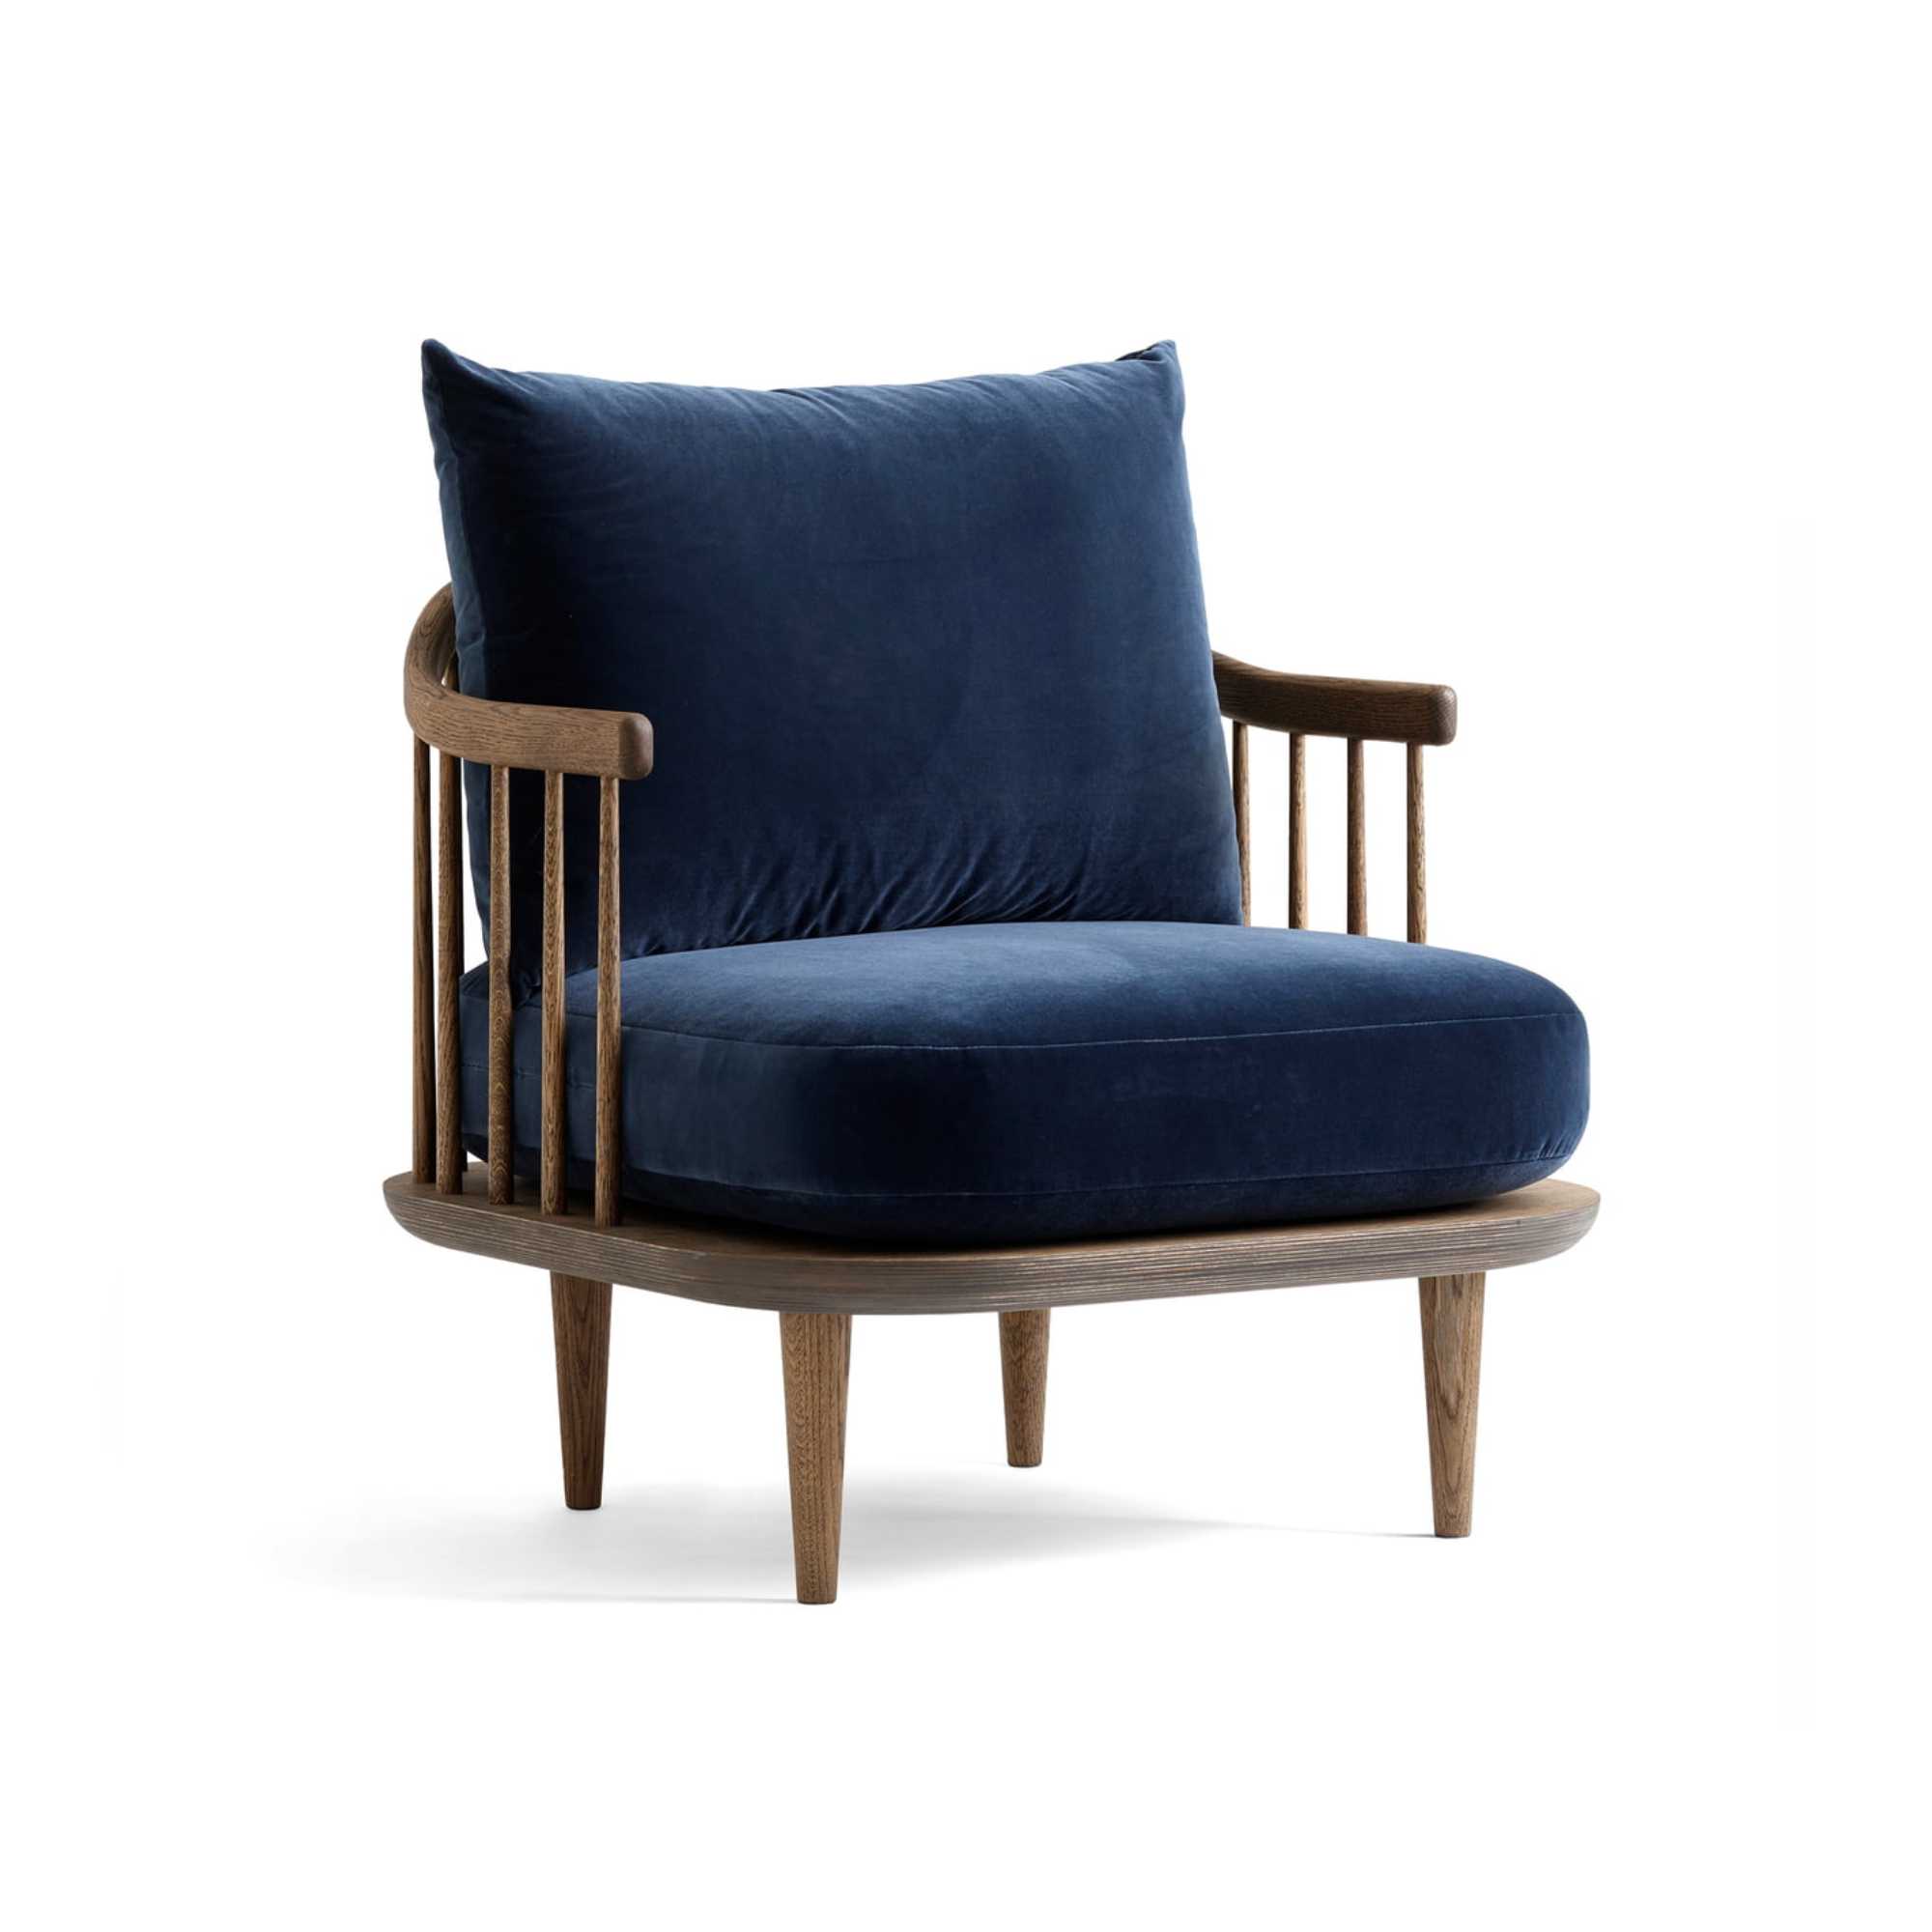 &Tradition SC10 Fly armchair, smoked oiled oak/harald 182